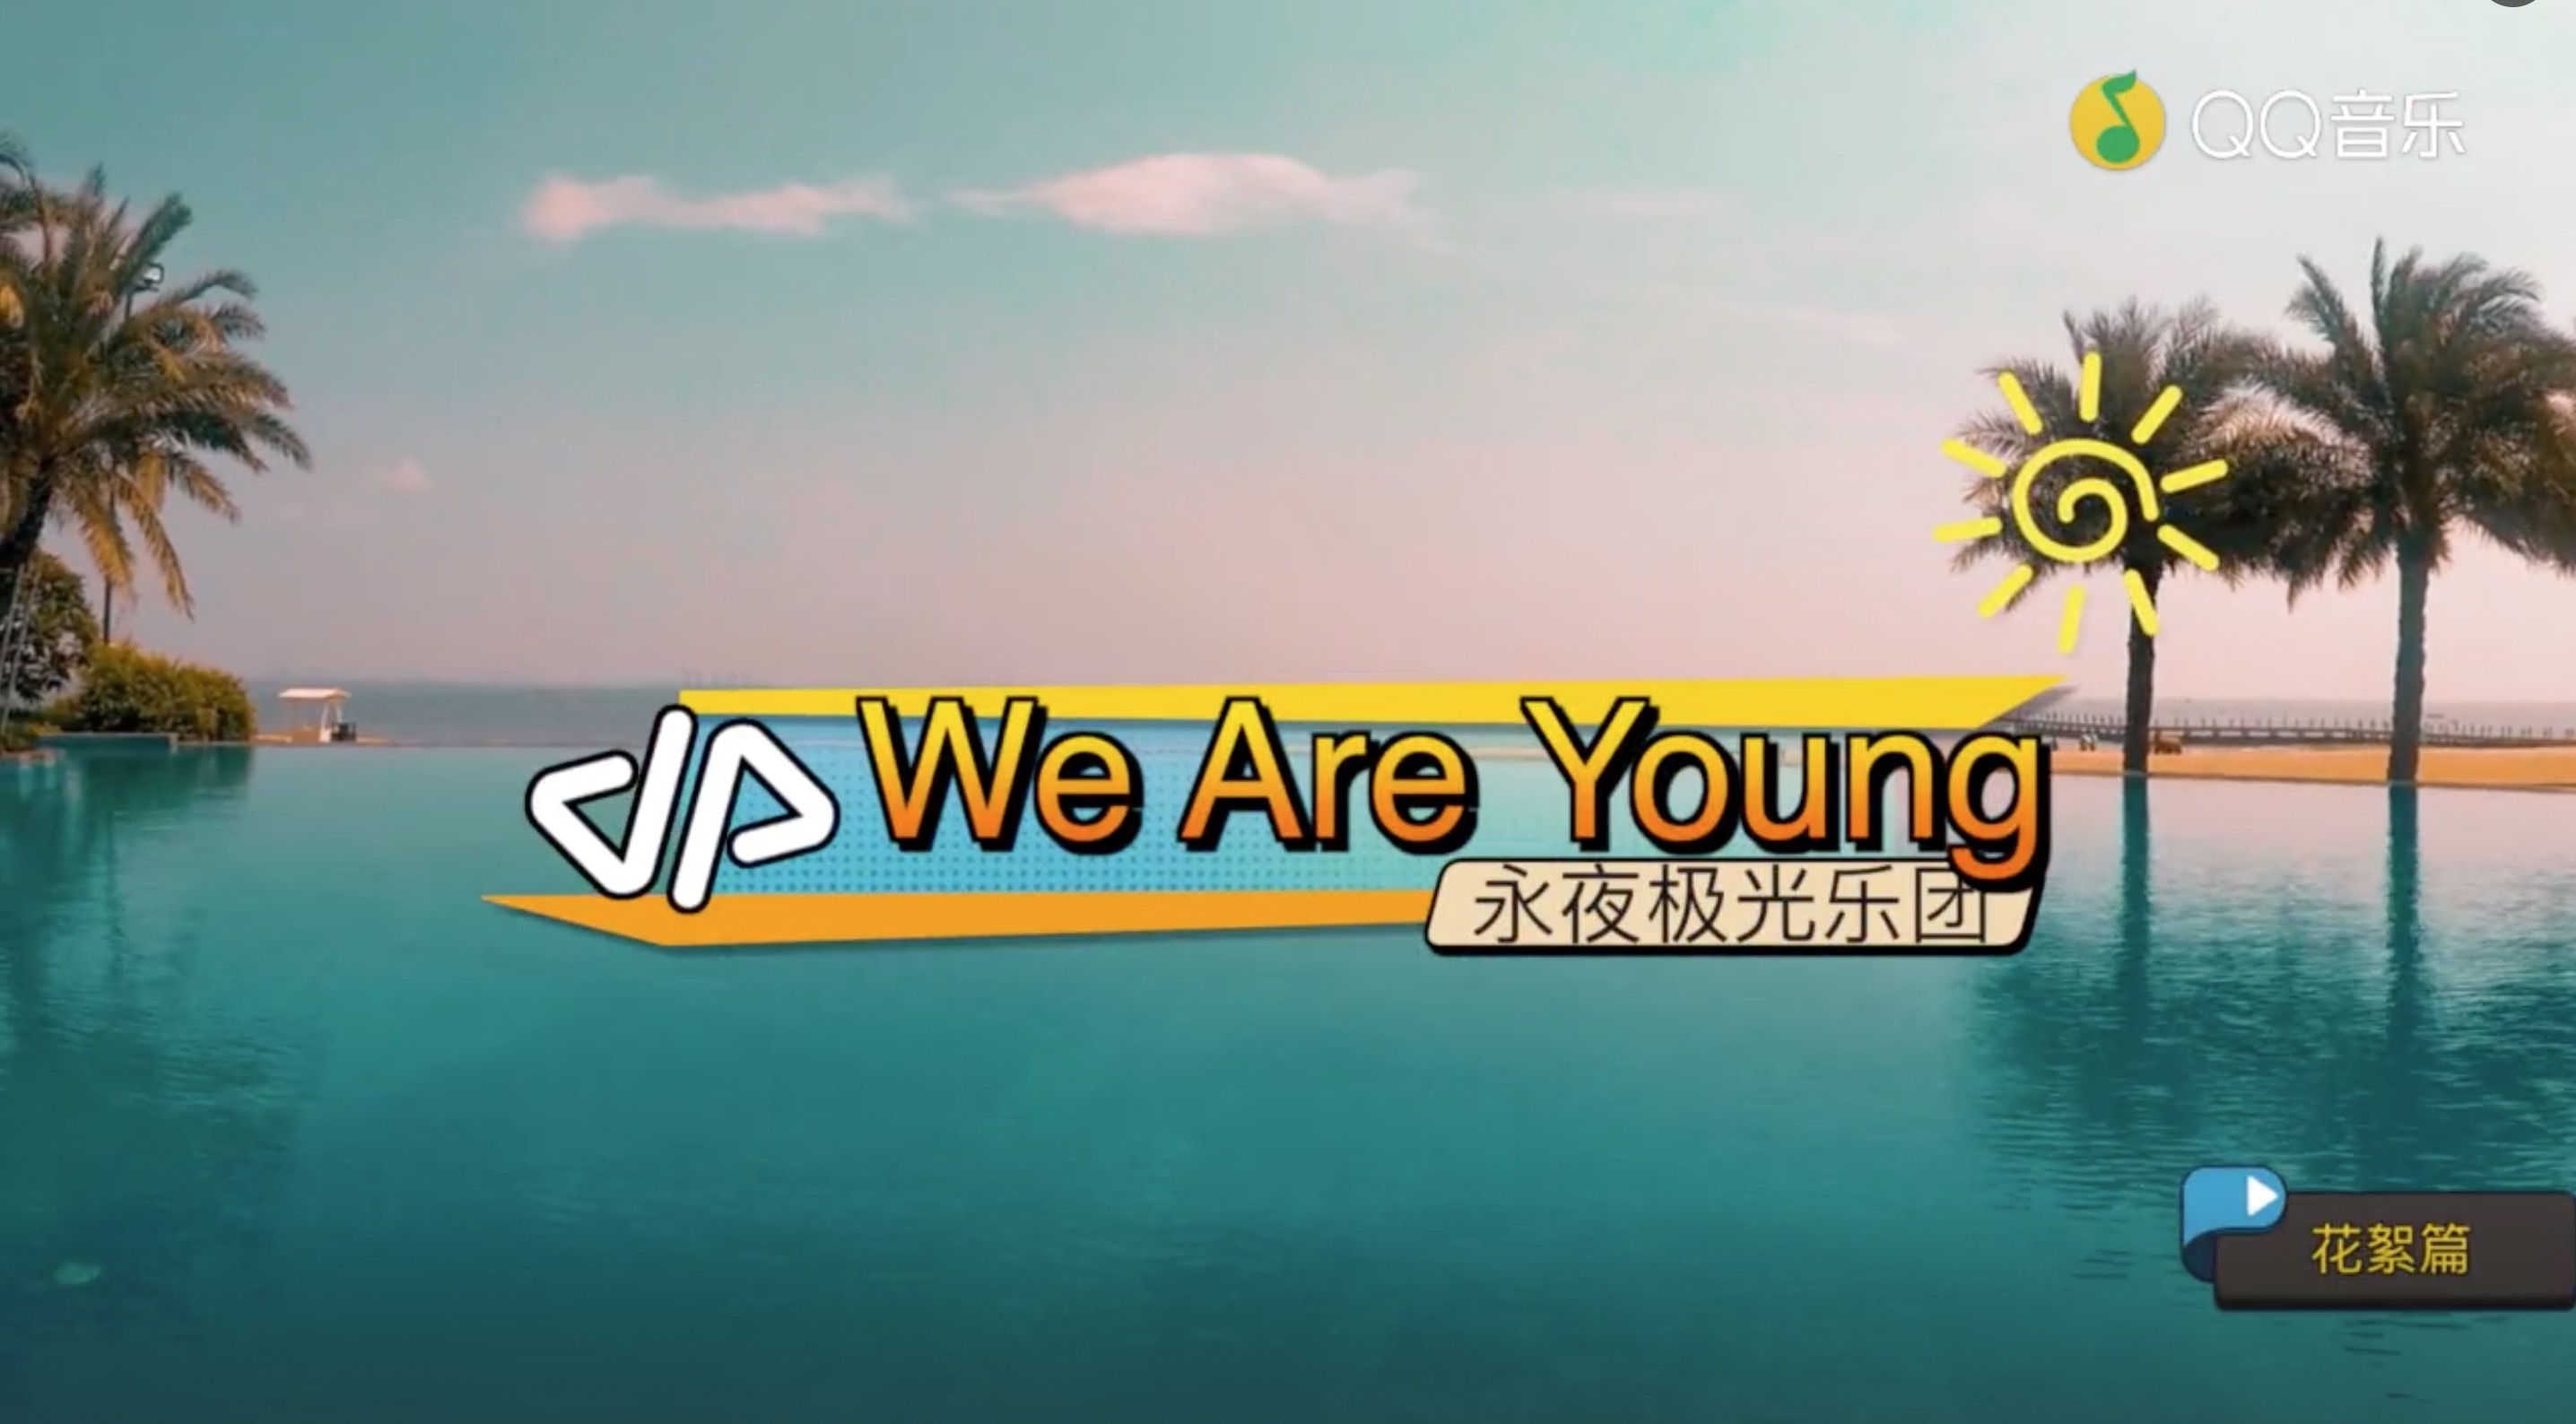 We Are Young(永夜極光樂團的歌曲)